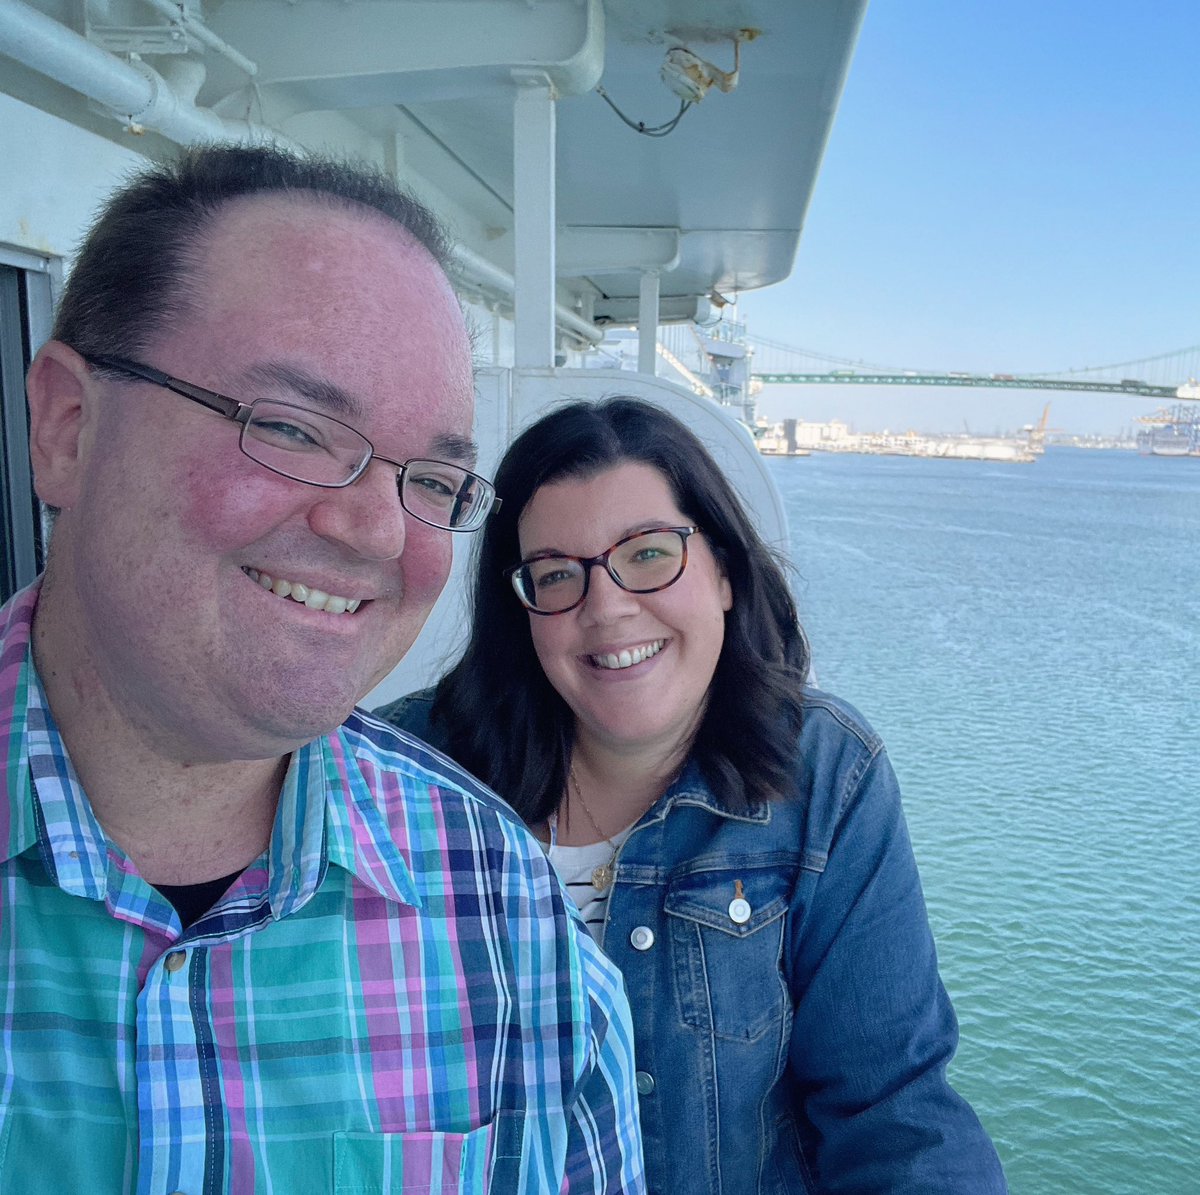 Embarkation shirt is in full effect onboard Island Princess as we get ready to set sail from Los Angeles on our first full transit Panama Canal cruise through the historic locks!! :D #IslandPrincess #PrincessCruises #PanamaCanal @PrincessCruises